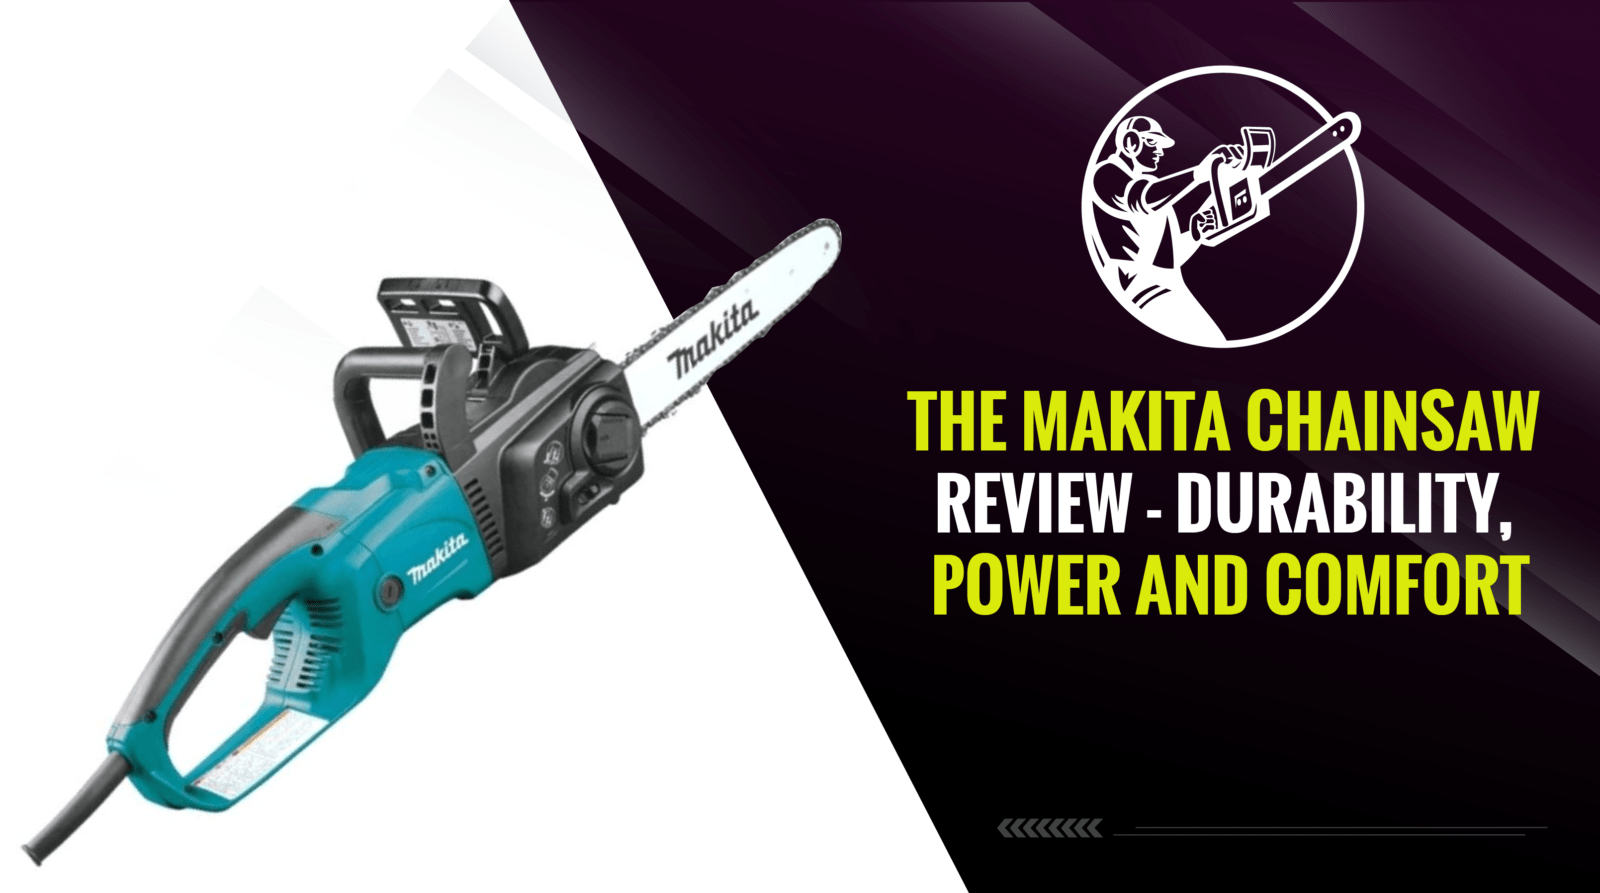 The Makita Chainsaw Review – Durability, Power and Comfort